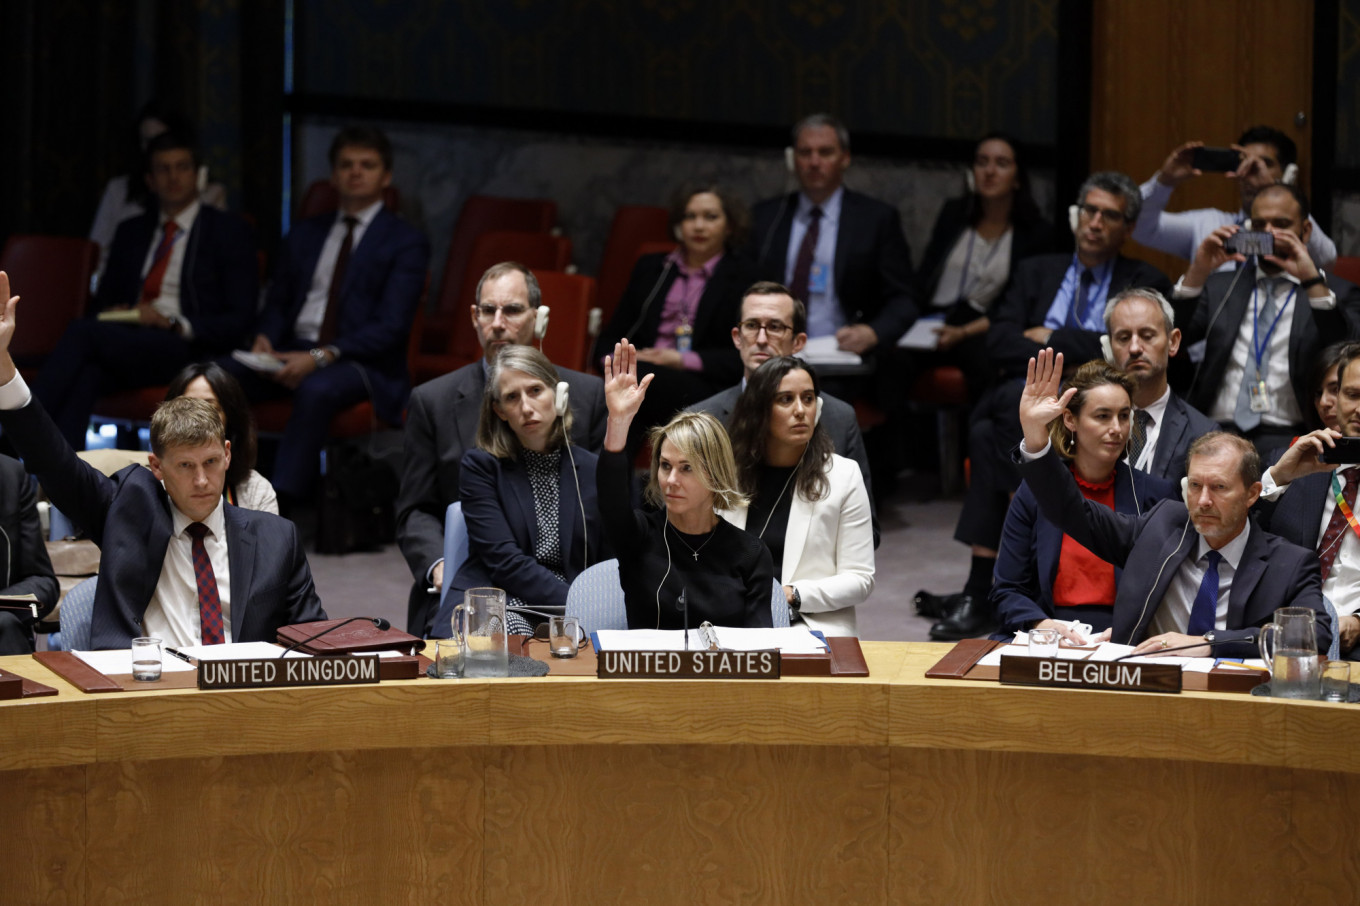 Russia Casts 13th Veto of UN Security Council Action During Syrian War